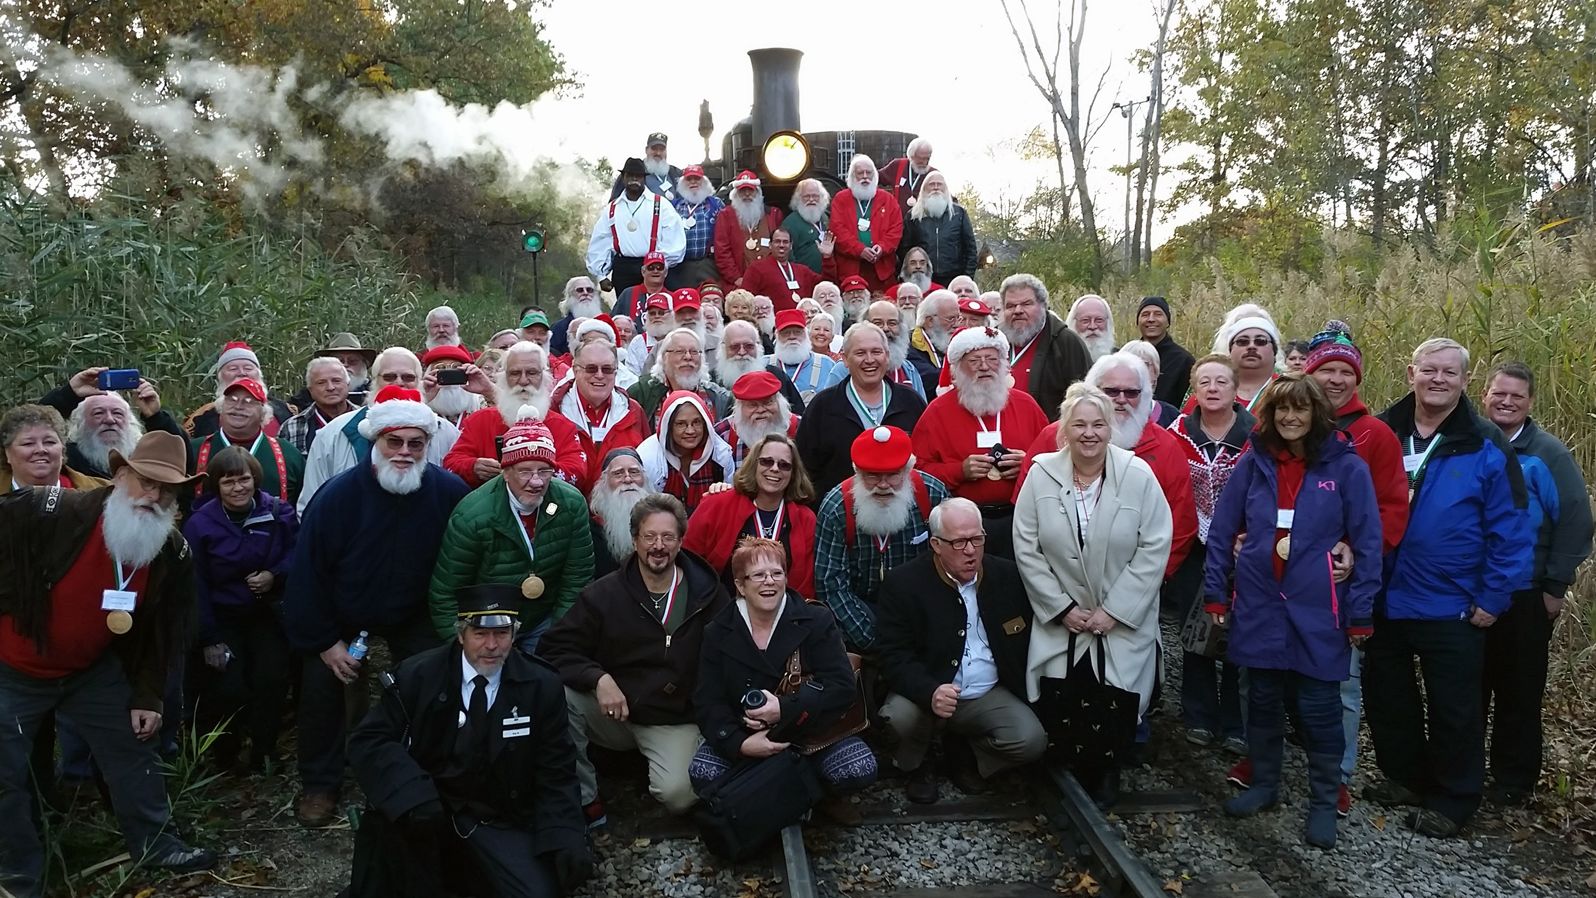 The 2015 Charles W. Howard Santa Claus School participants pose for a photo at Huckleberry Railroad.